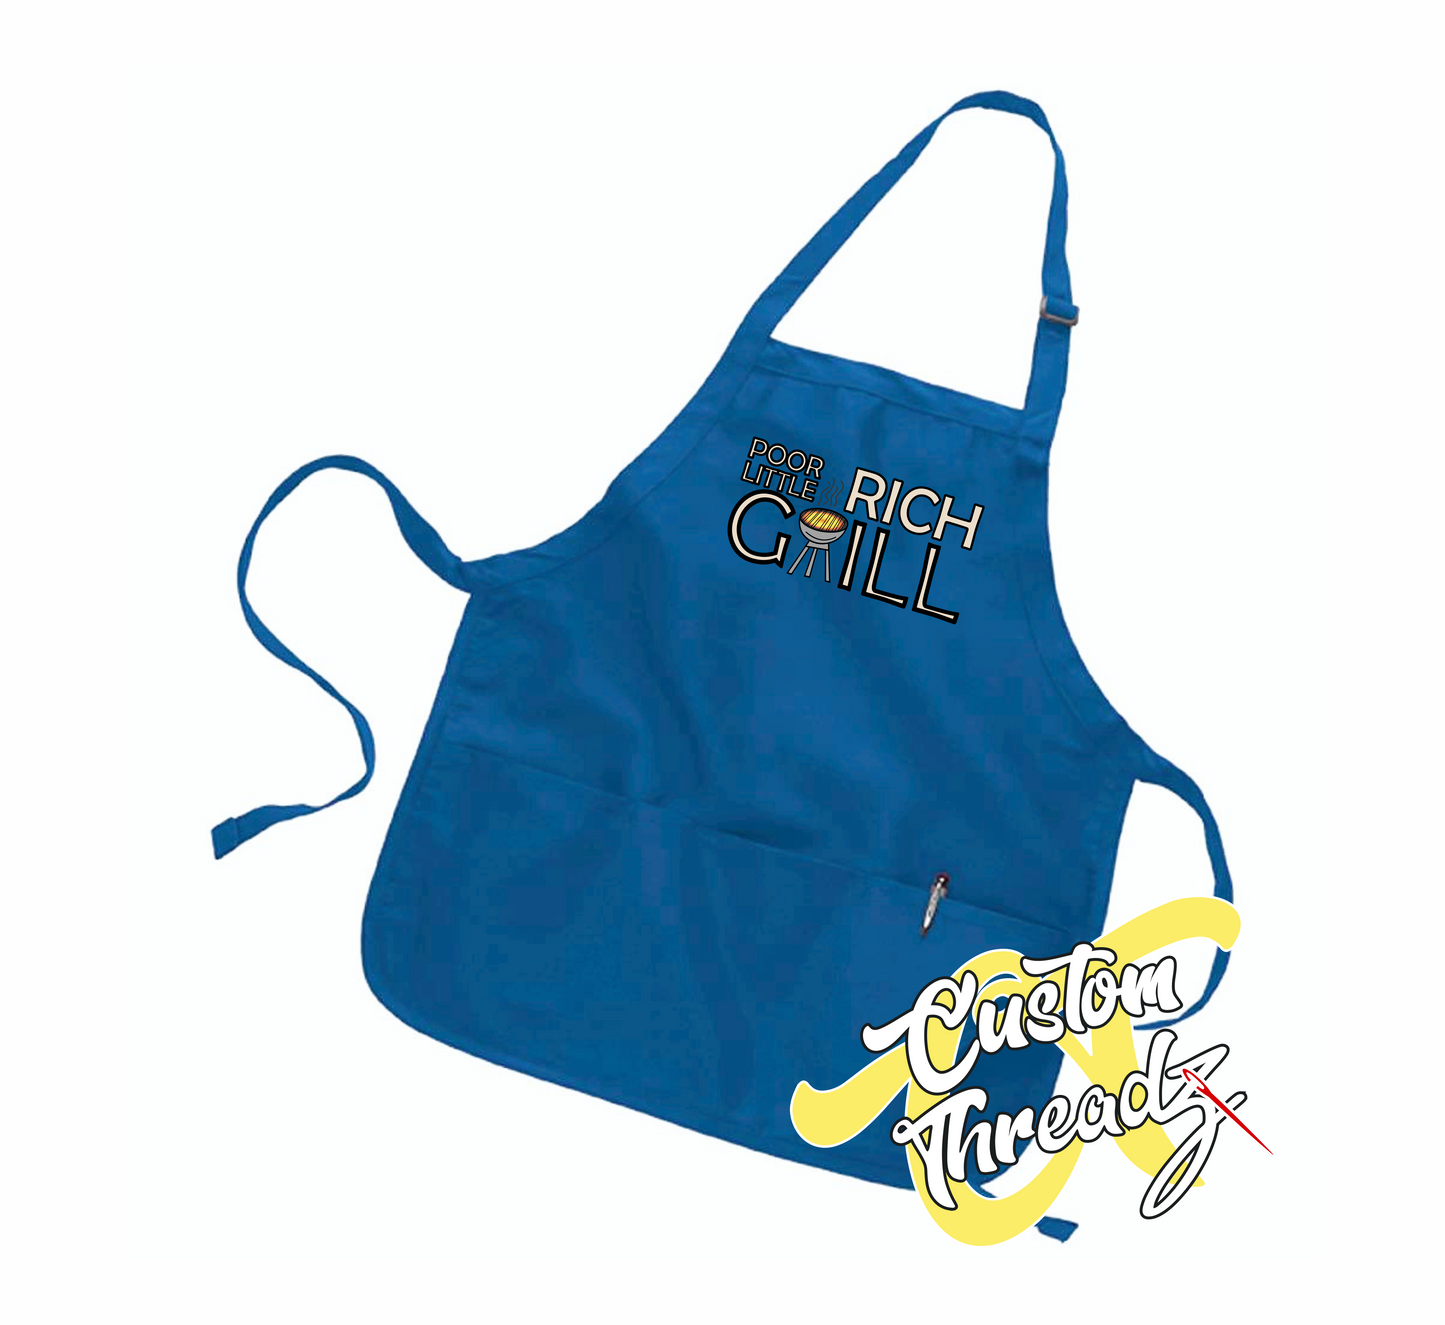 royal blue apron with poor little rich grill schitts creek DTG printed design